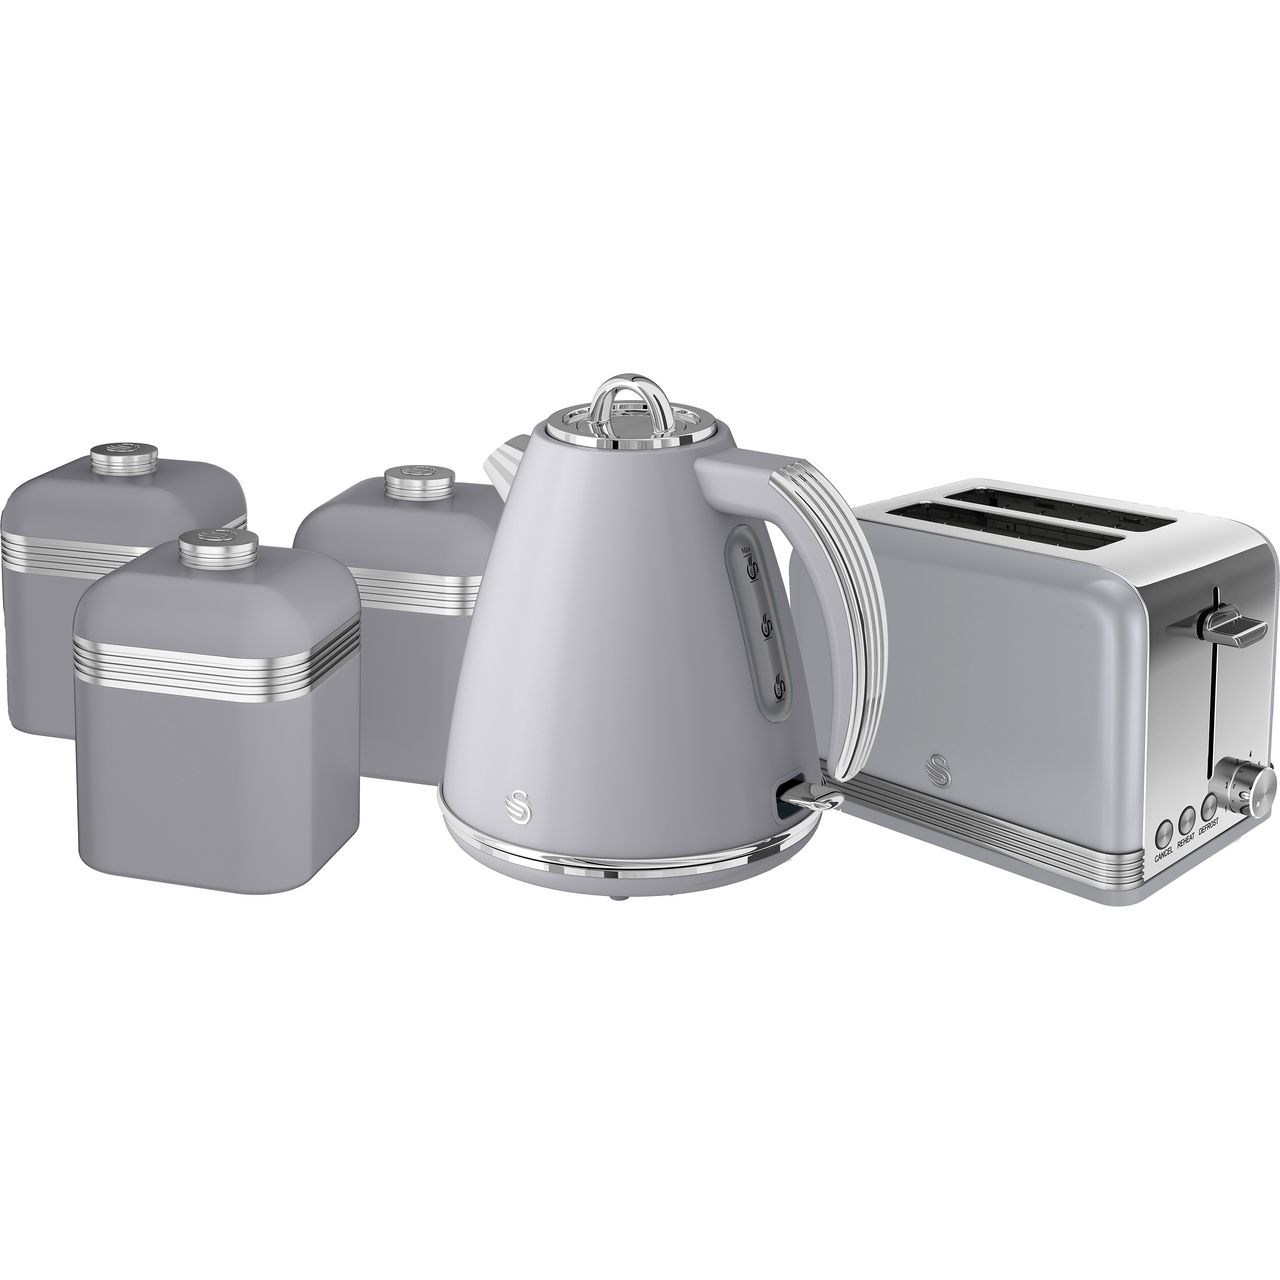 Swan Retro STRP3022GRN Kettle And Toaster Sets Review